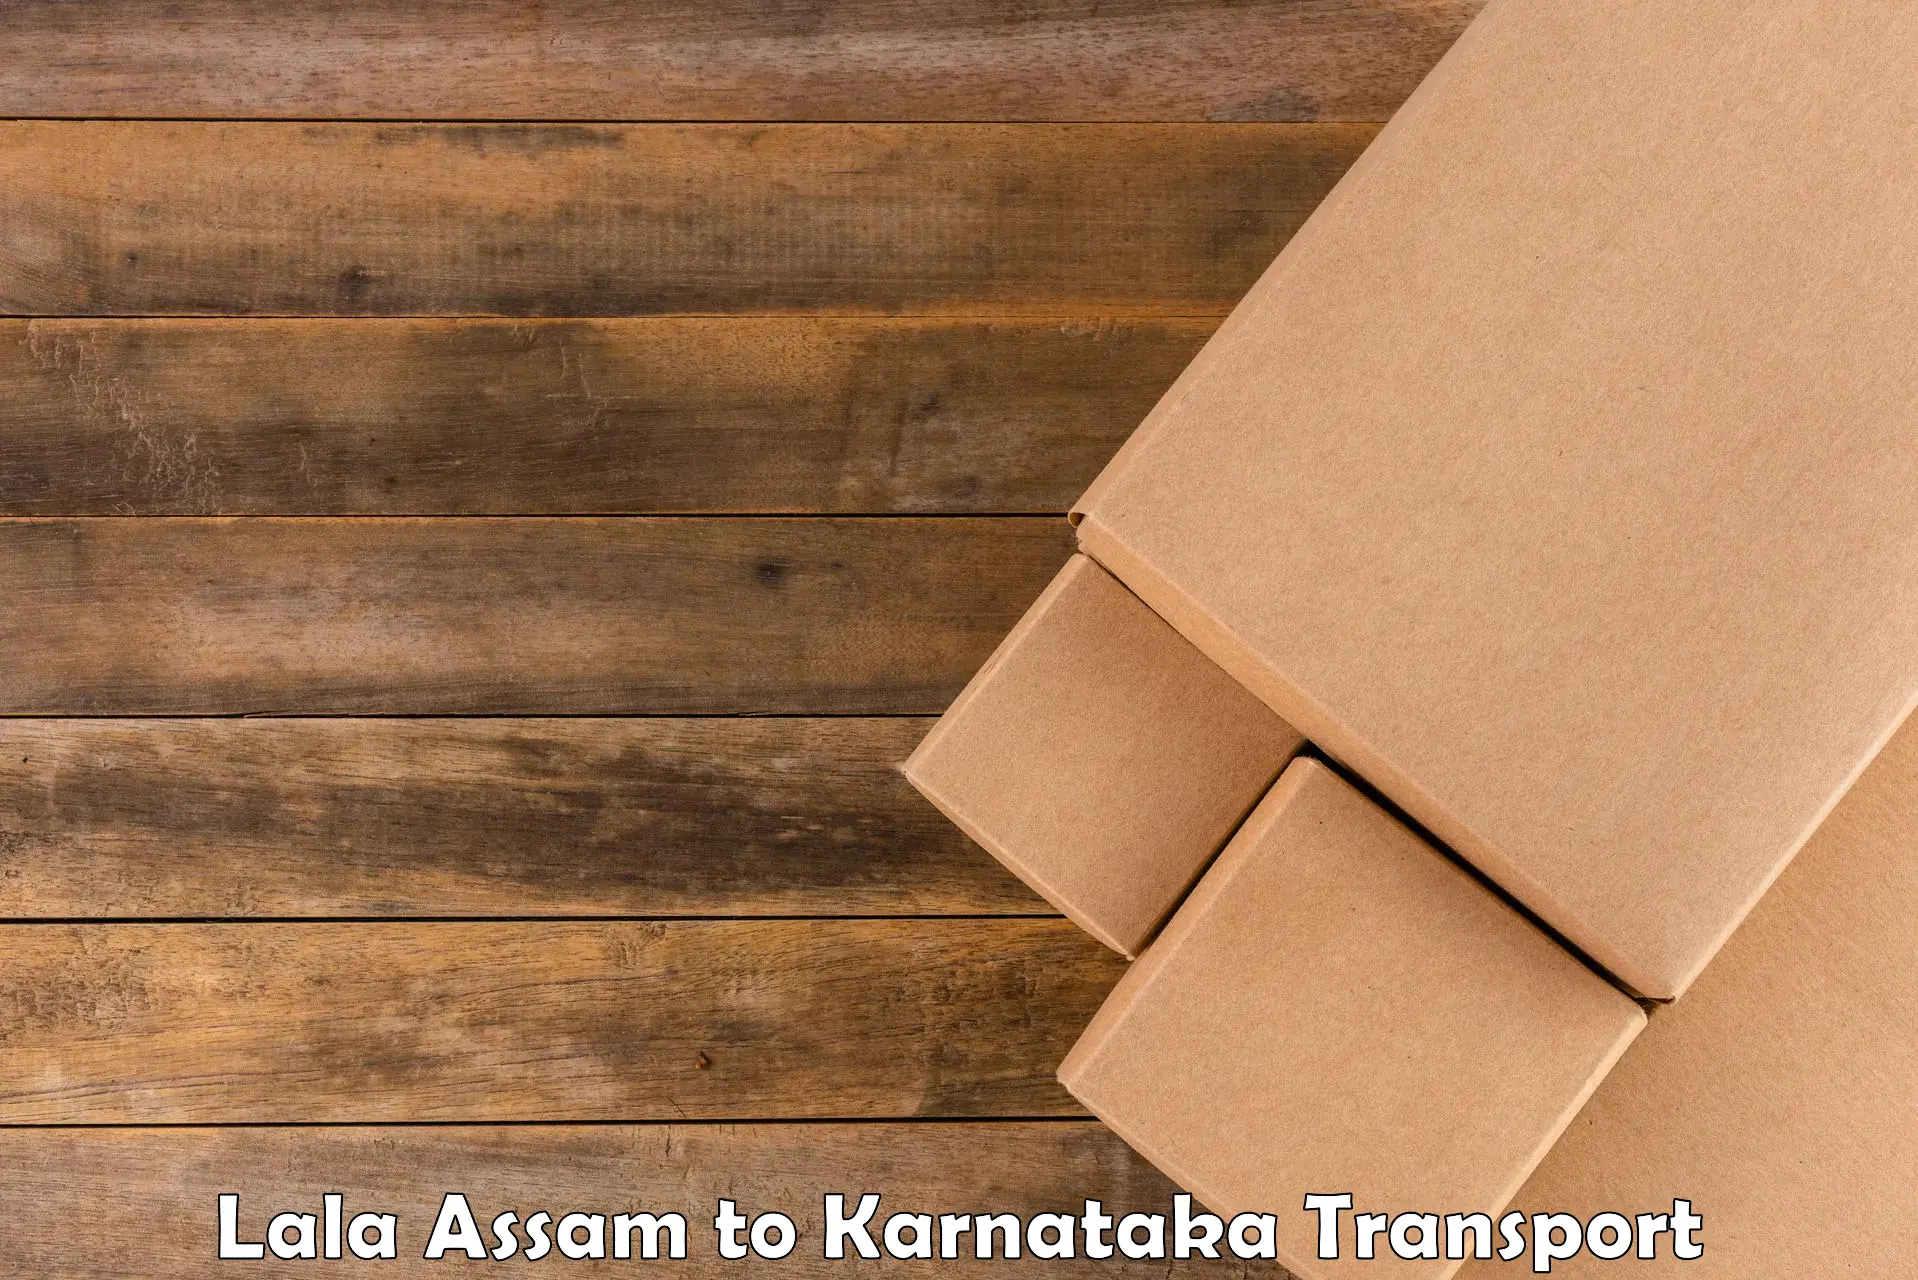 Vehicle transport services Lala Assam to Dharwad